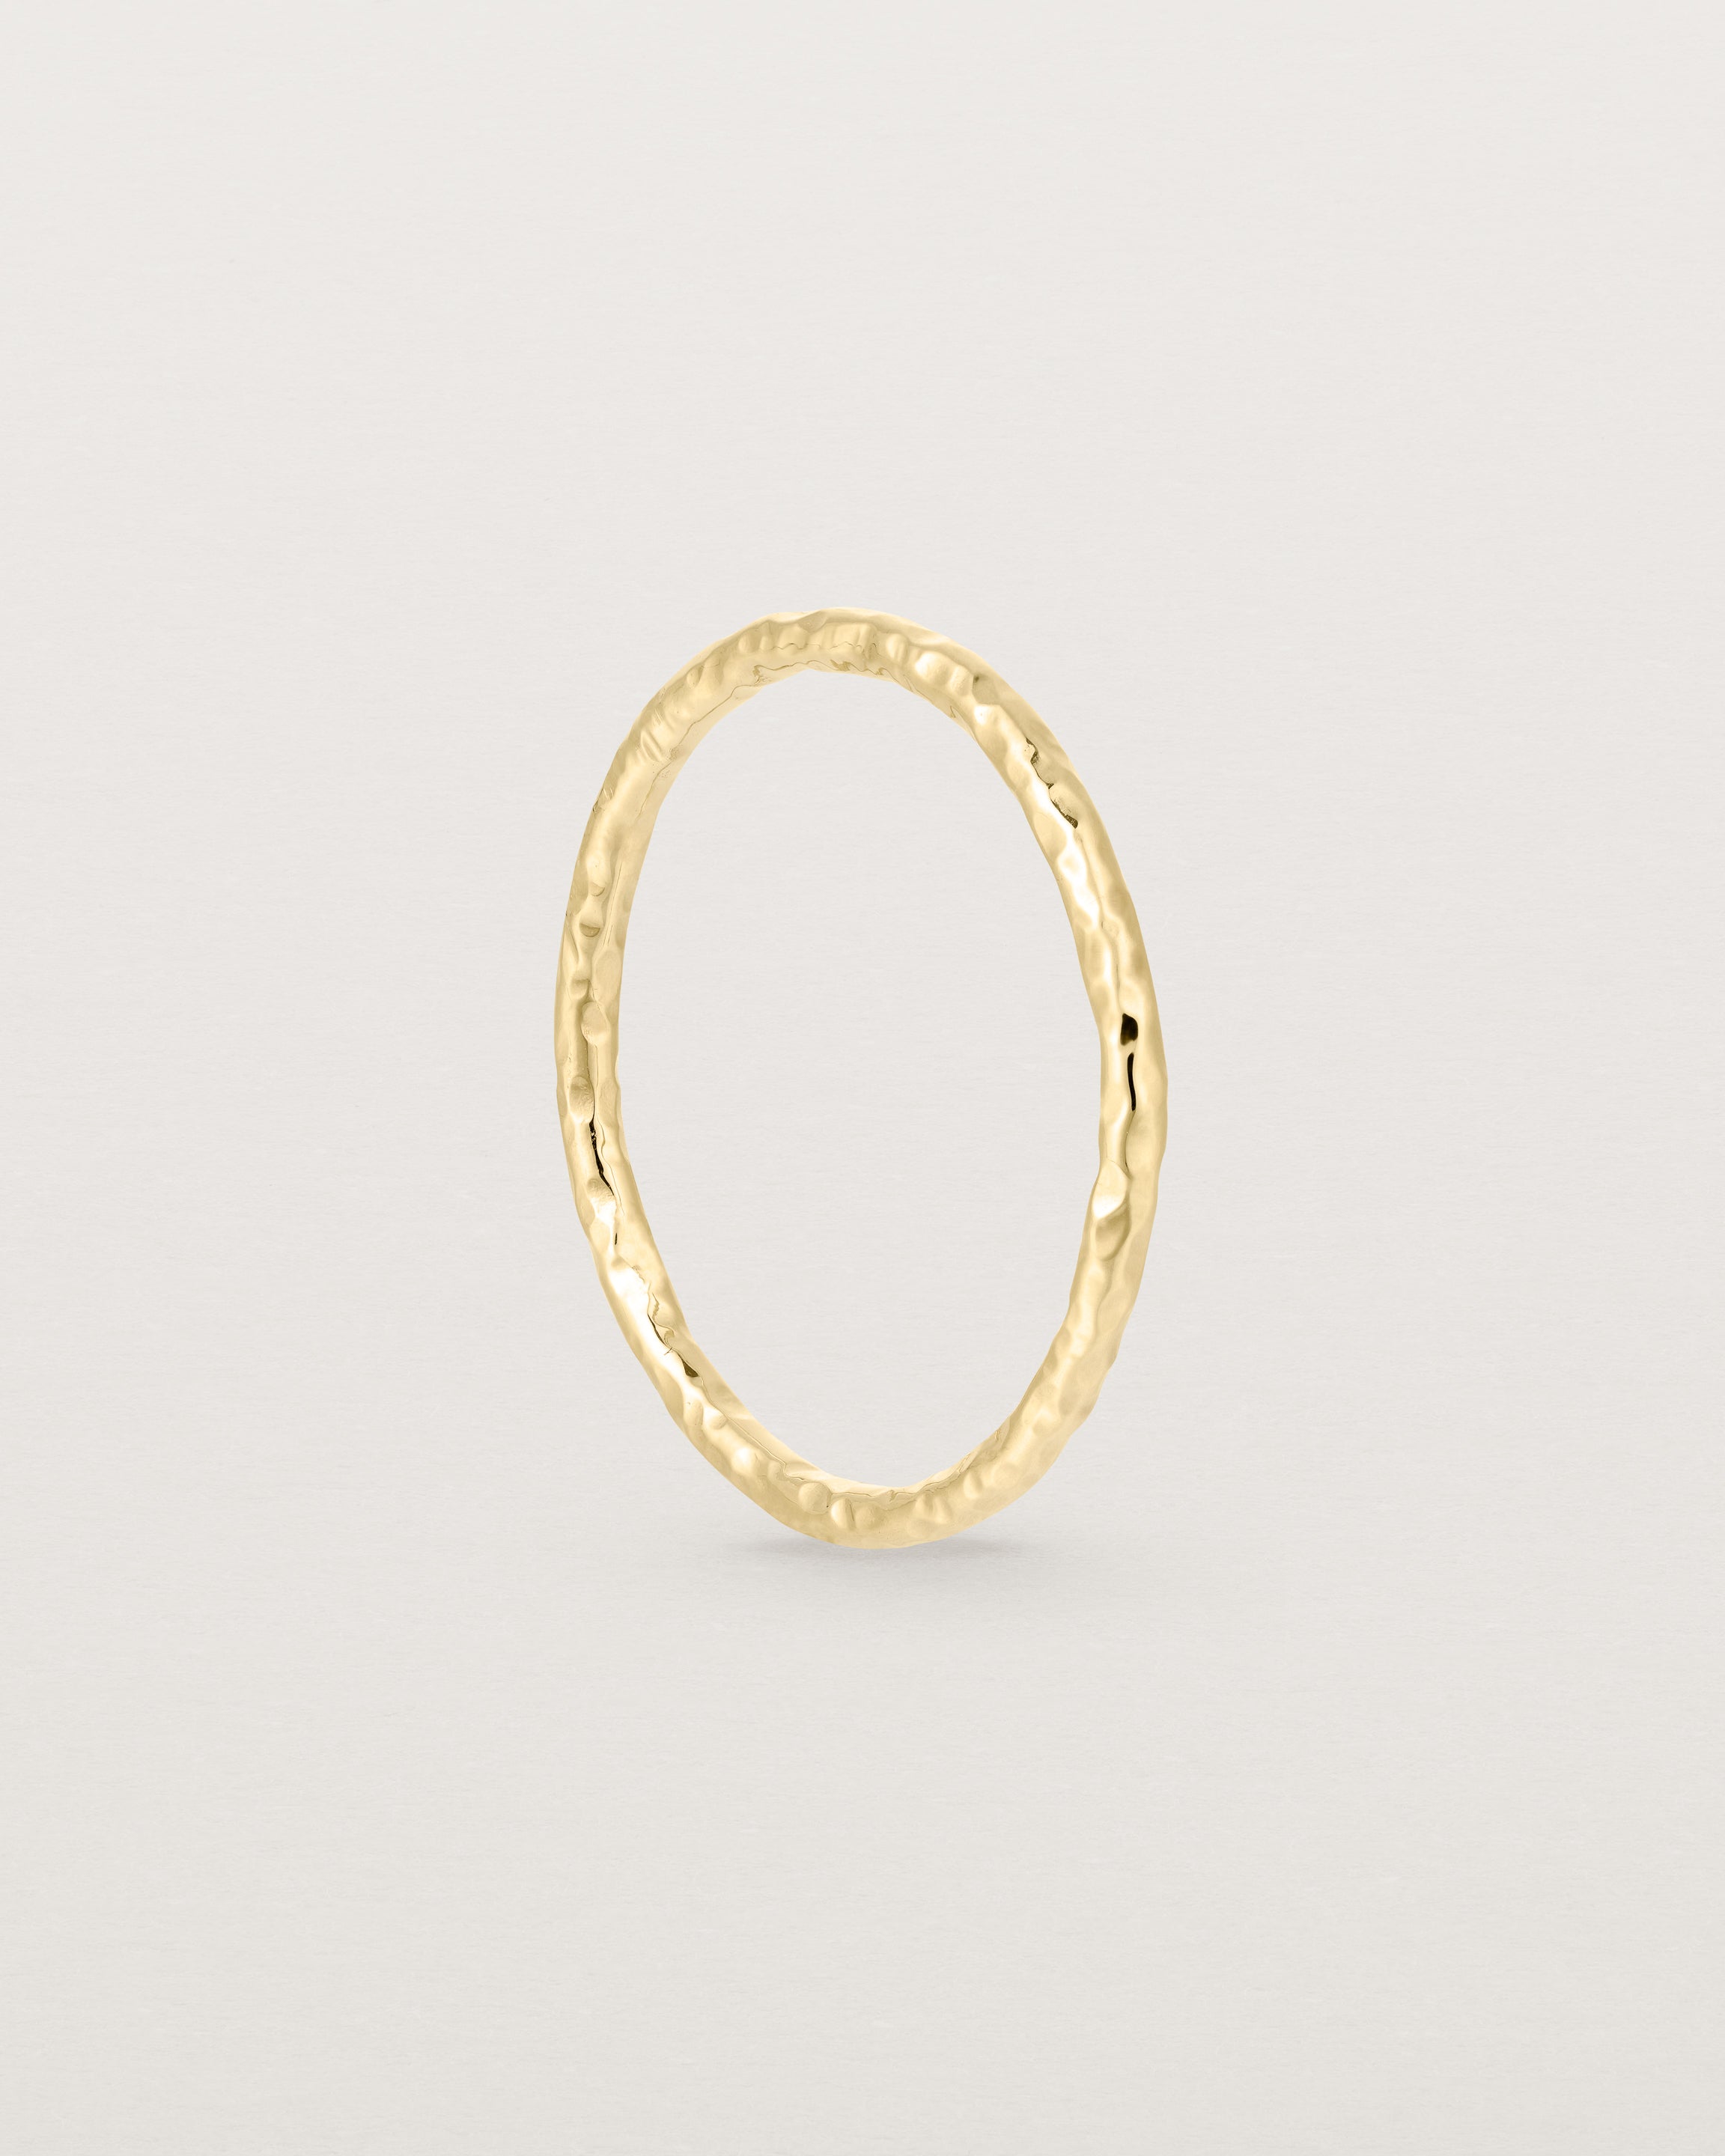 Standing view of the Faceted Wedding Ring in Yellow Gold.